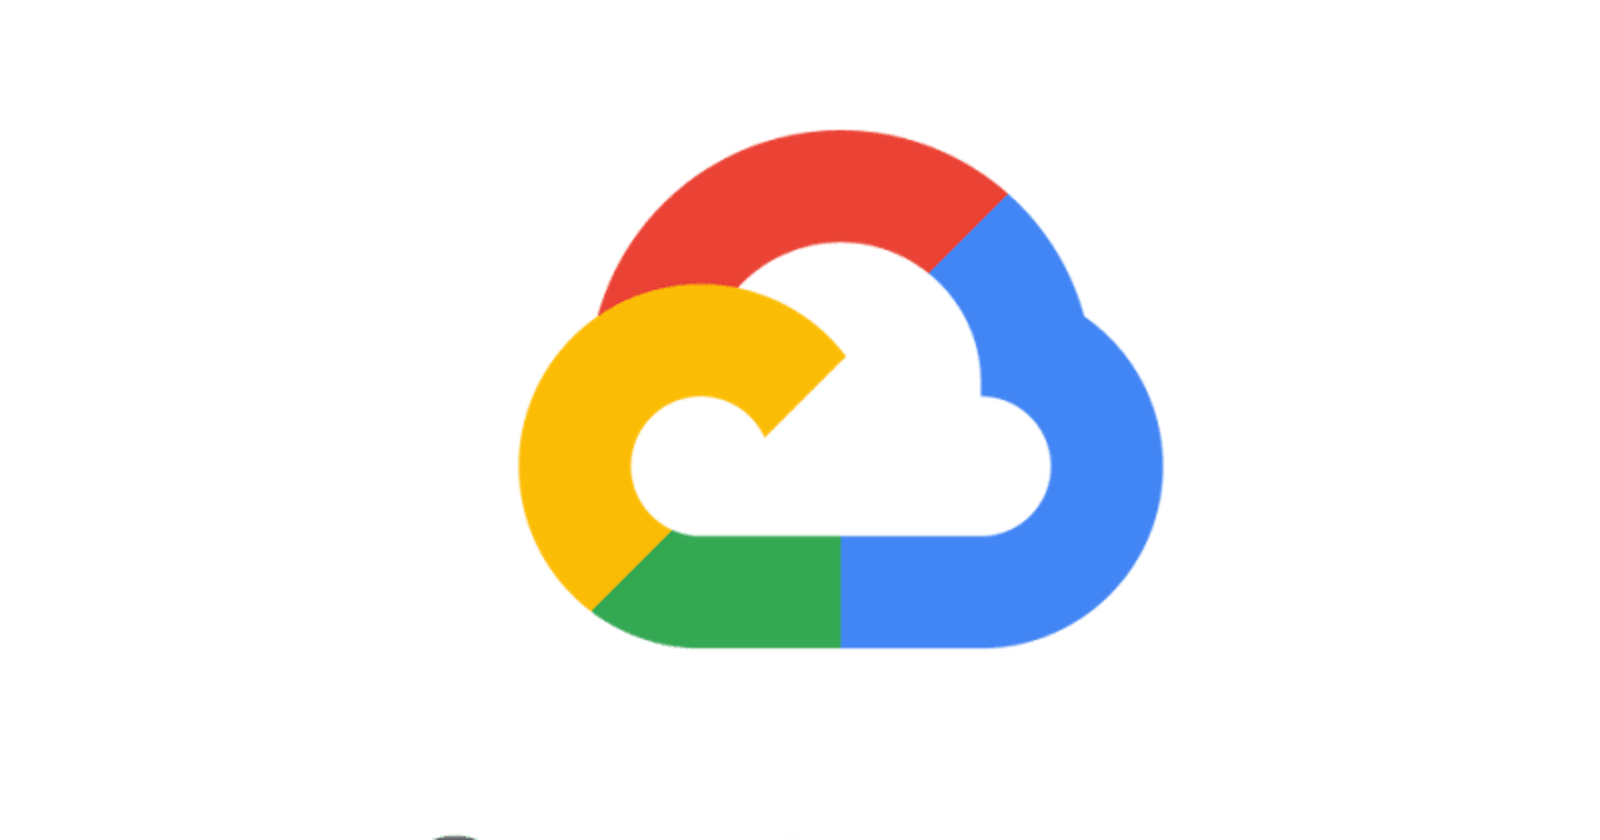 Getting Started with Google Cloud Platform — A Beginner’s Guide